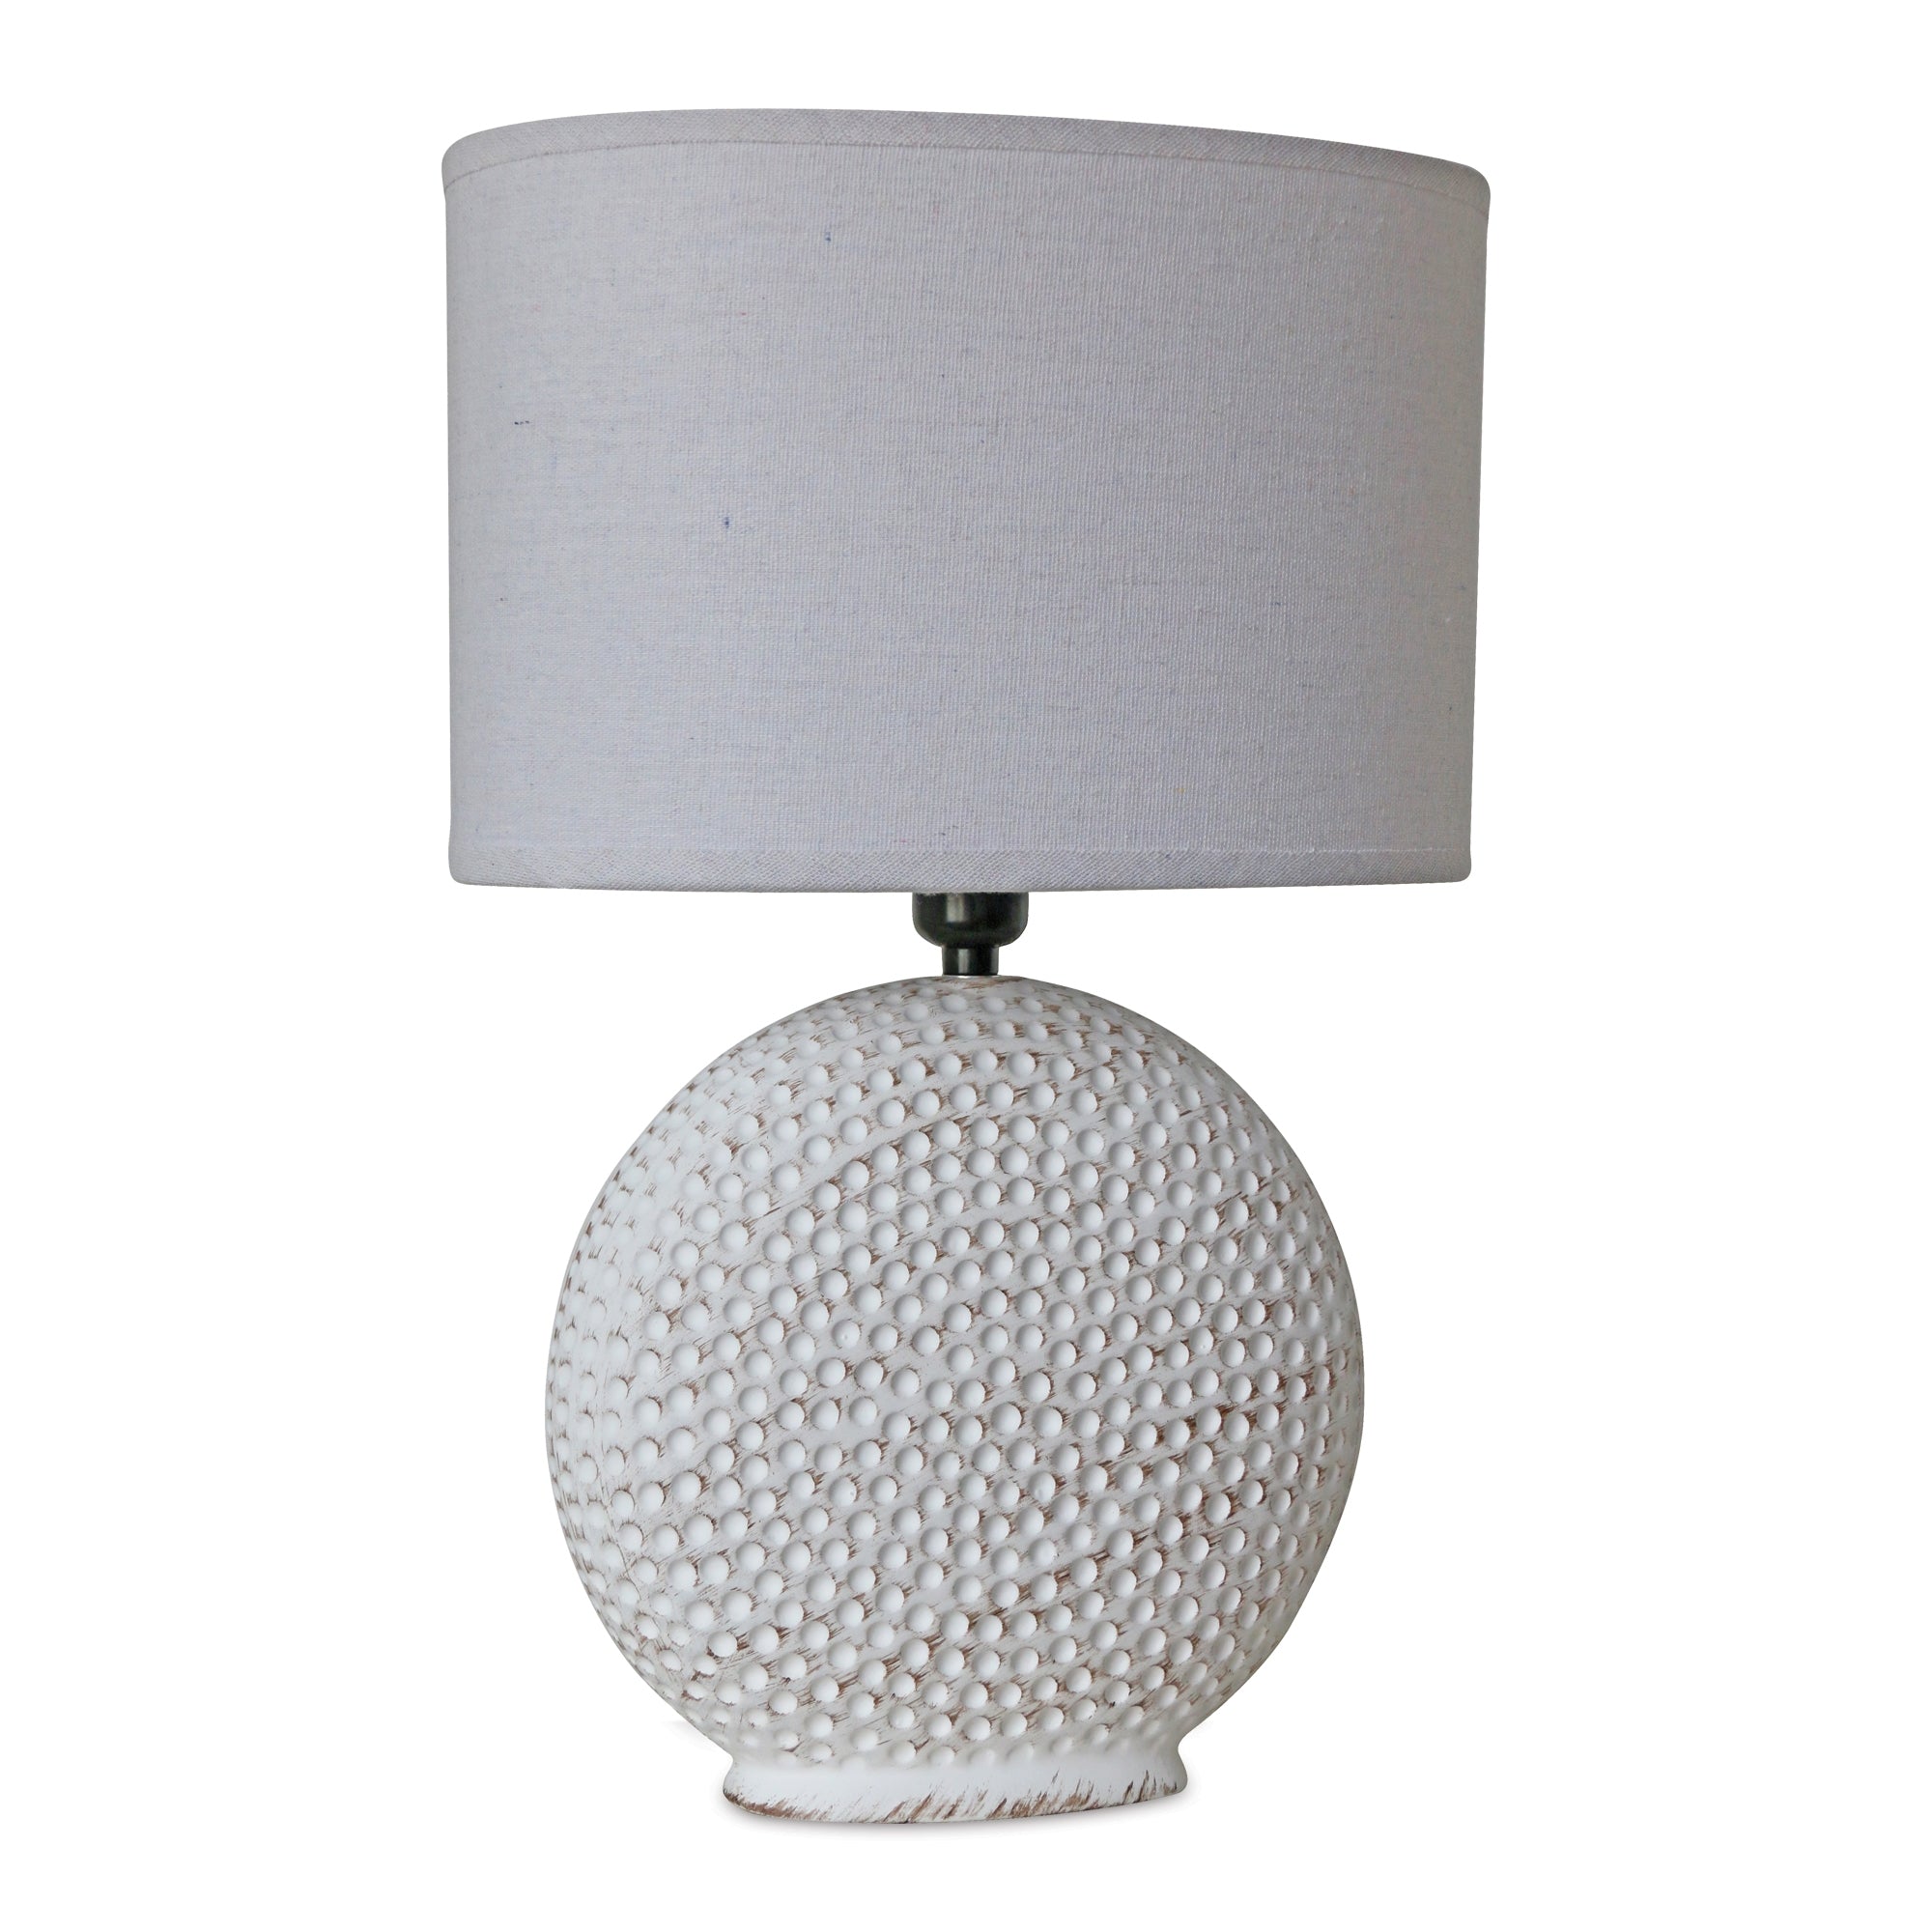 Notched Ceramic Table Lamp 18"H